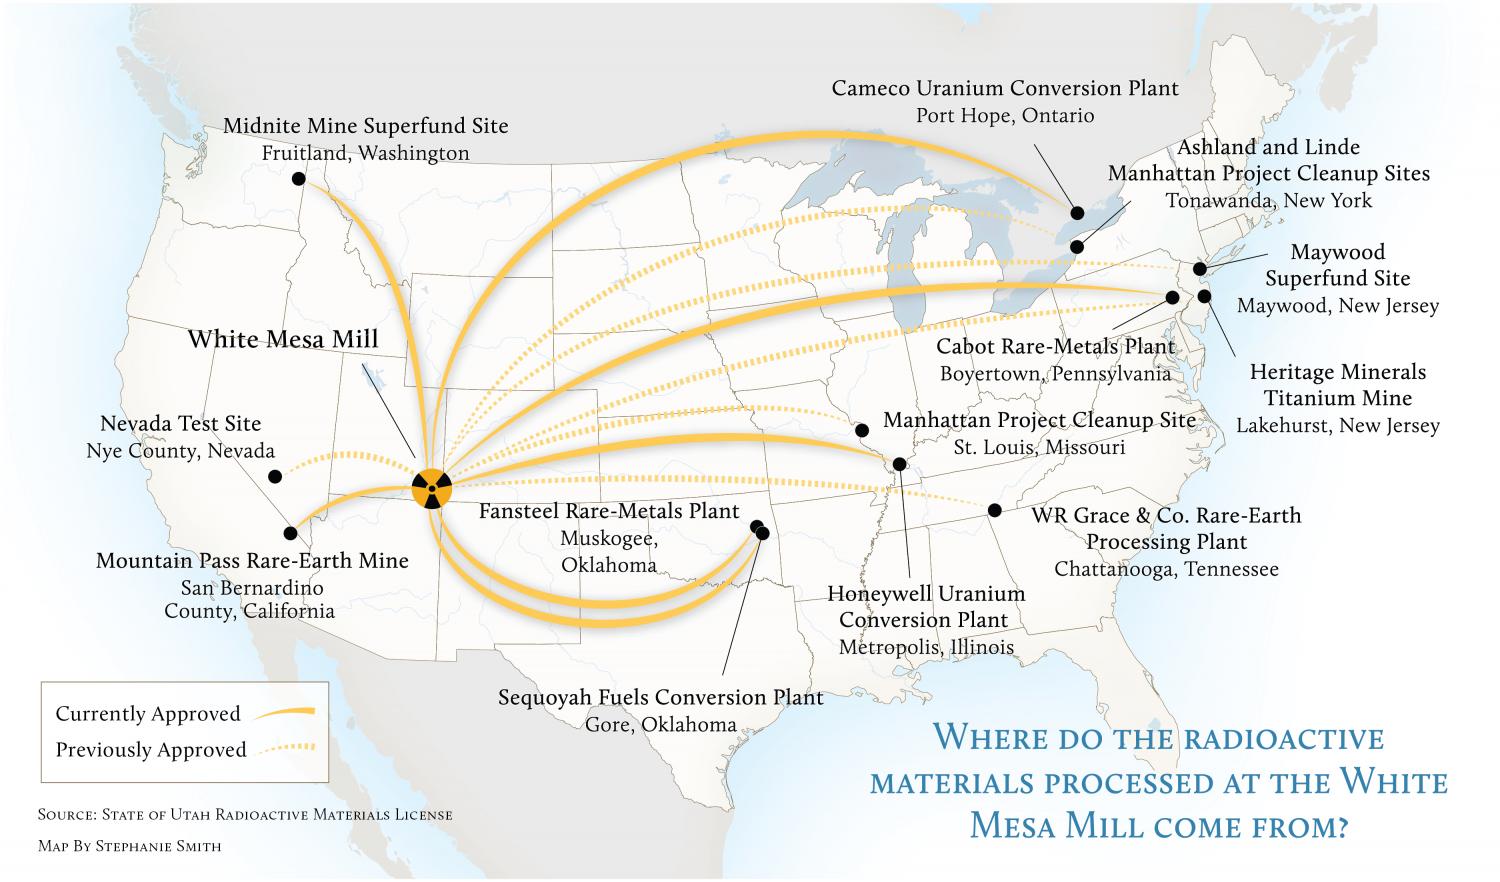 Map of where radioactive materials processed at White Mesa Mill come from.